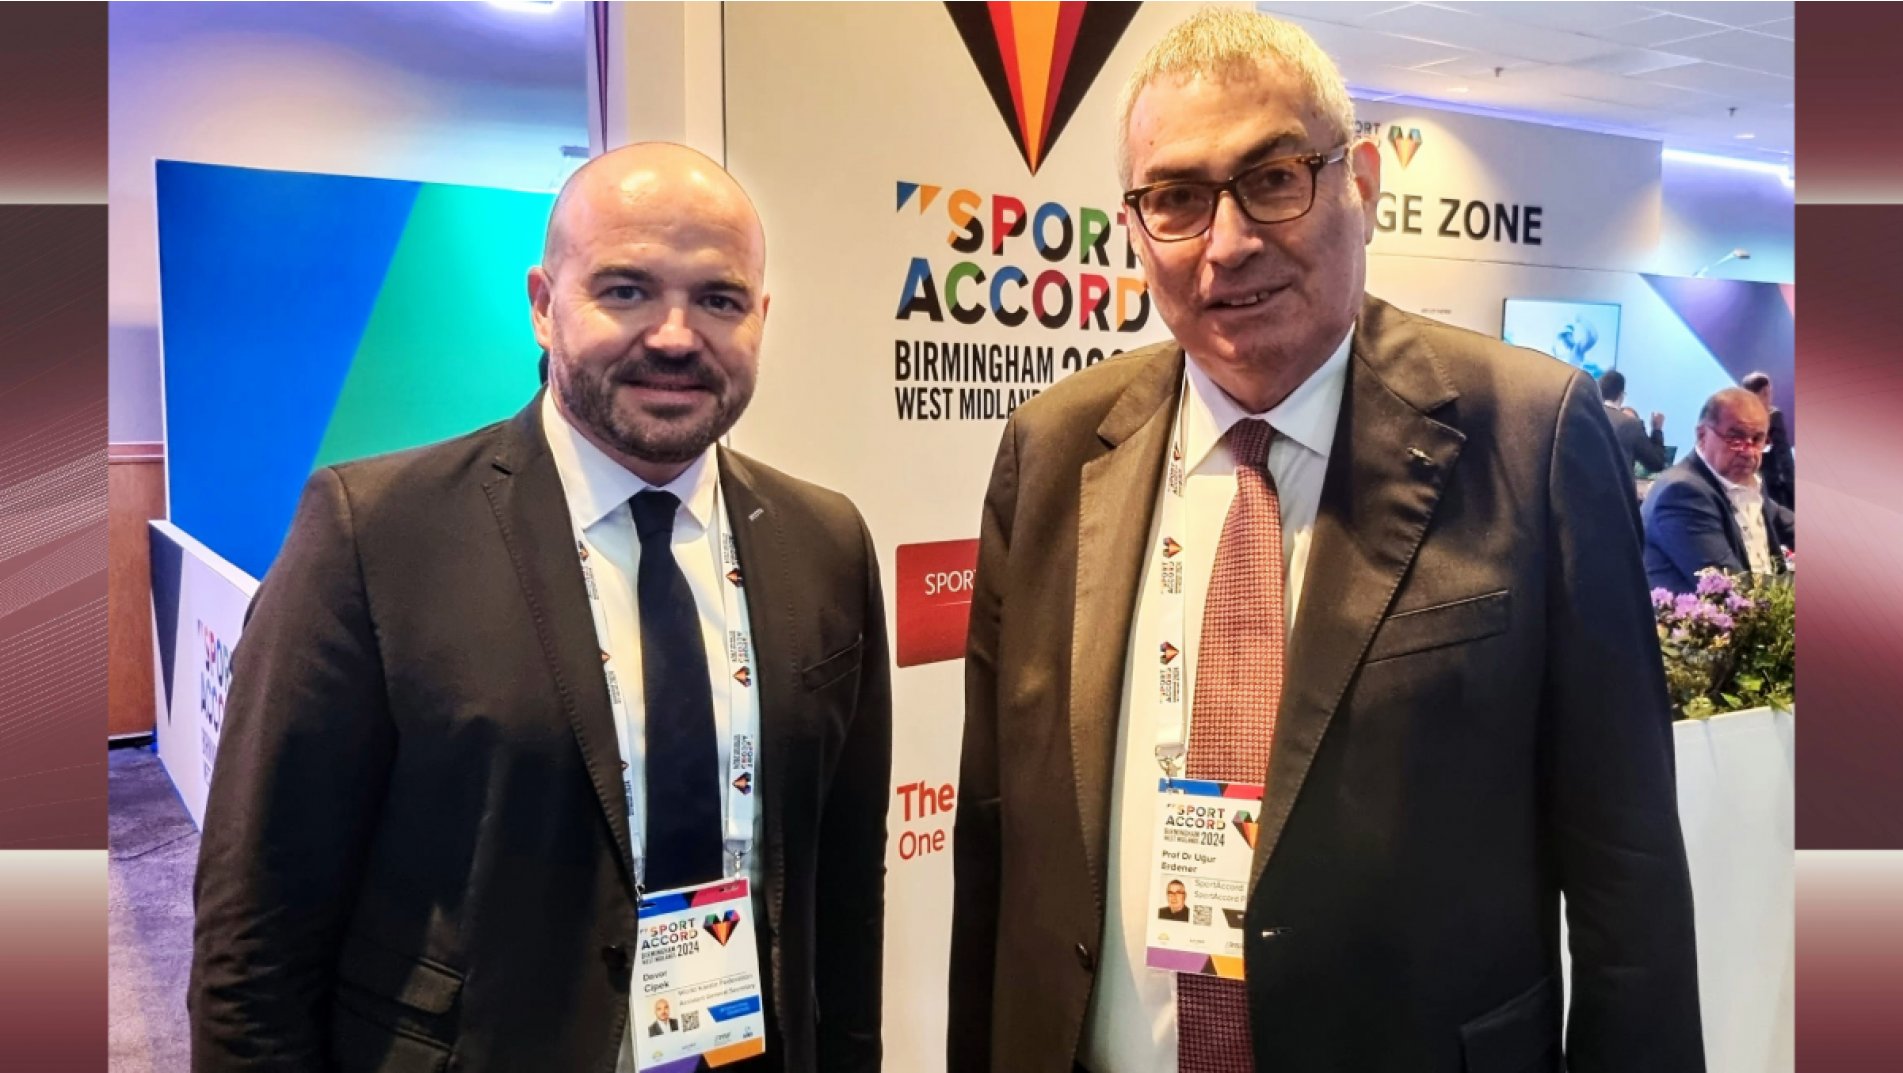 WKF Official discusses progress of Karate with SportAccord President at SportAccord World Sport & Business Summit